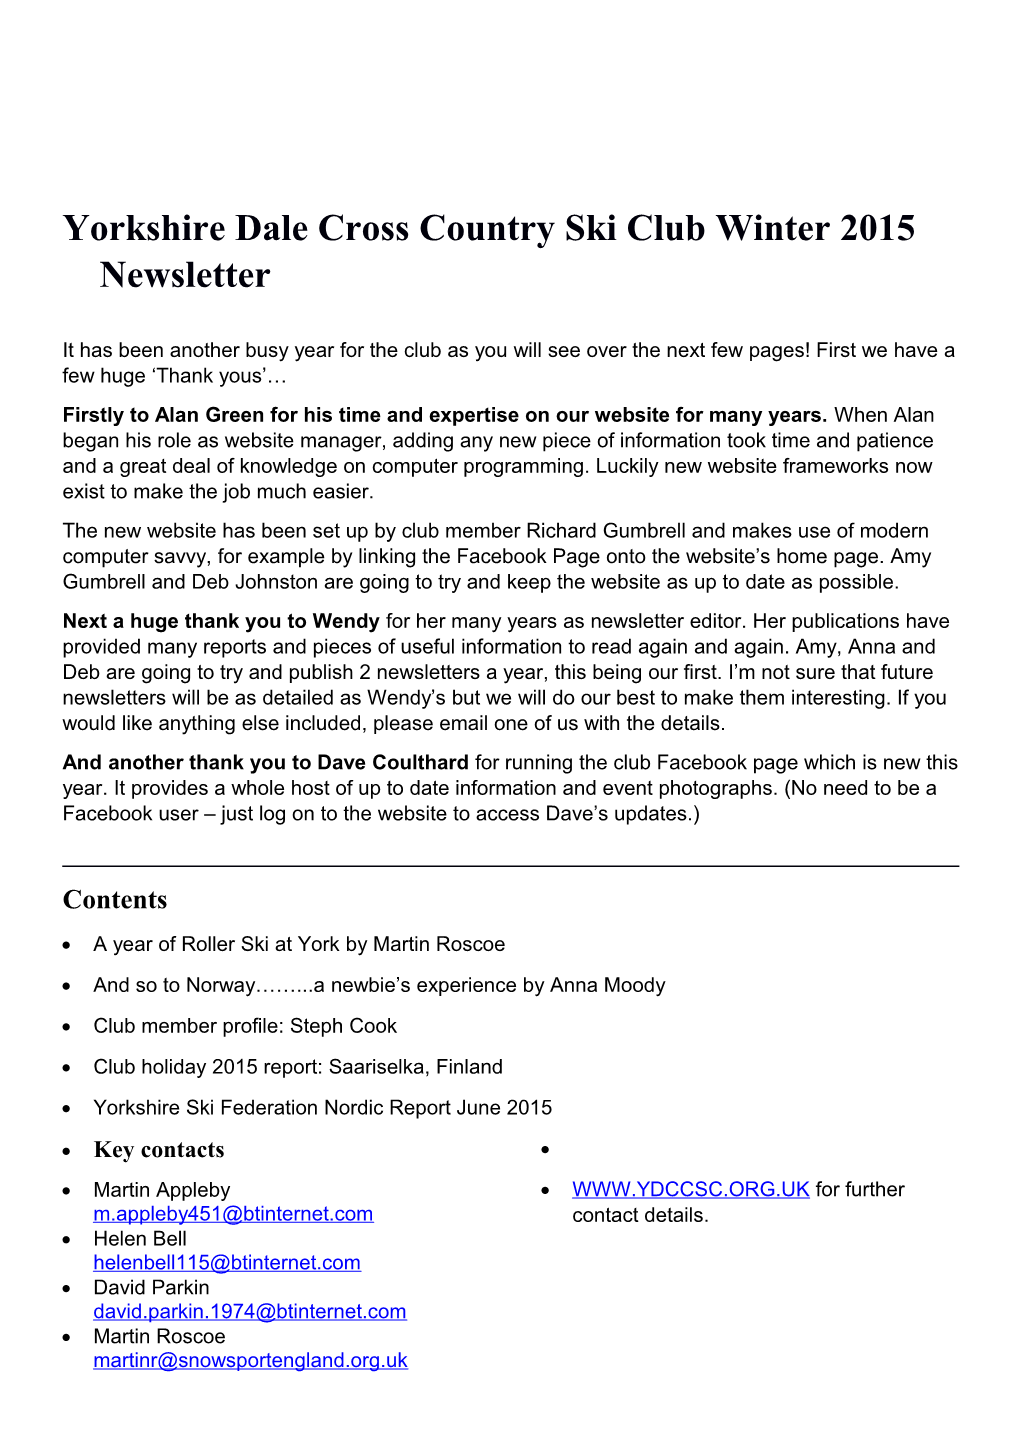 Yorkshire Dale Cross Country Ski Club Winter 2015 Newsletter